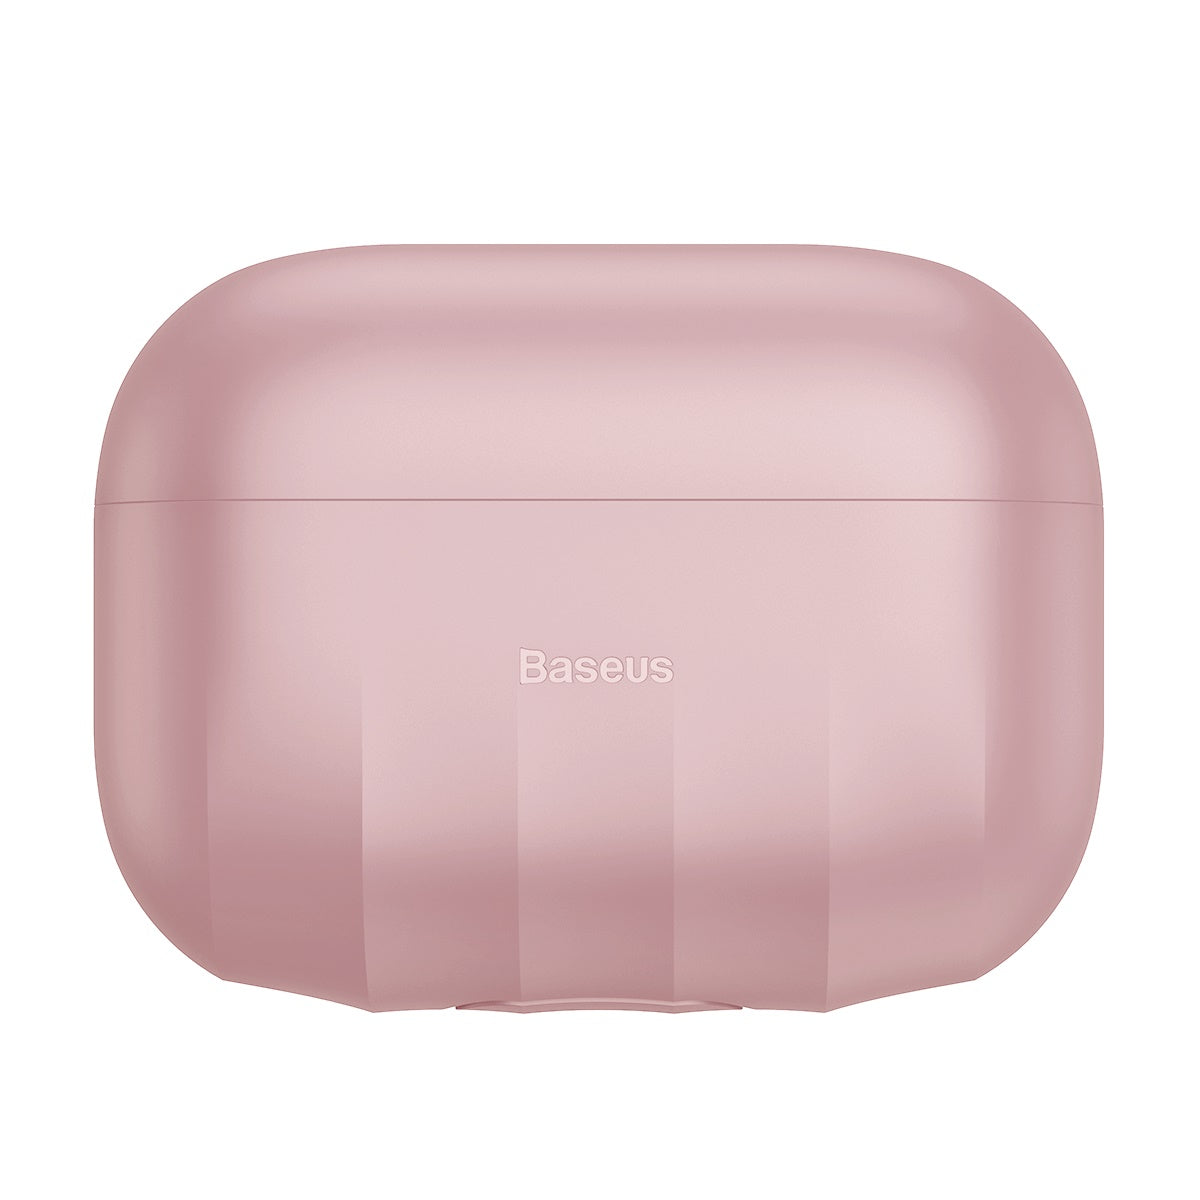 BASEUS Shell Pattern Silica Gel Case for AirPods Pro